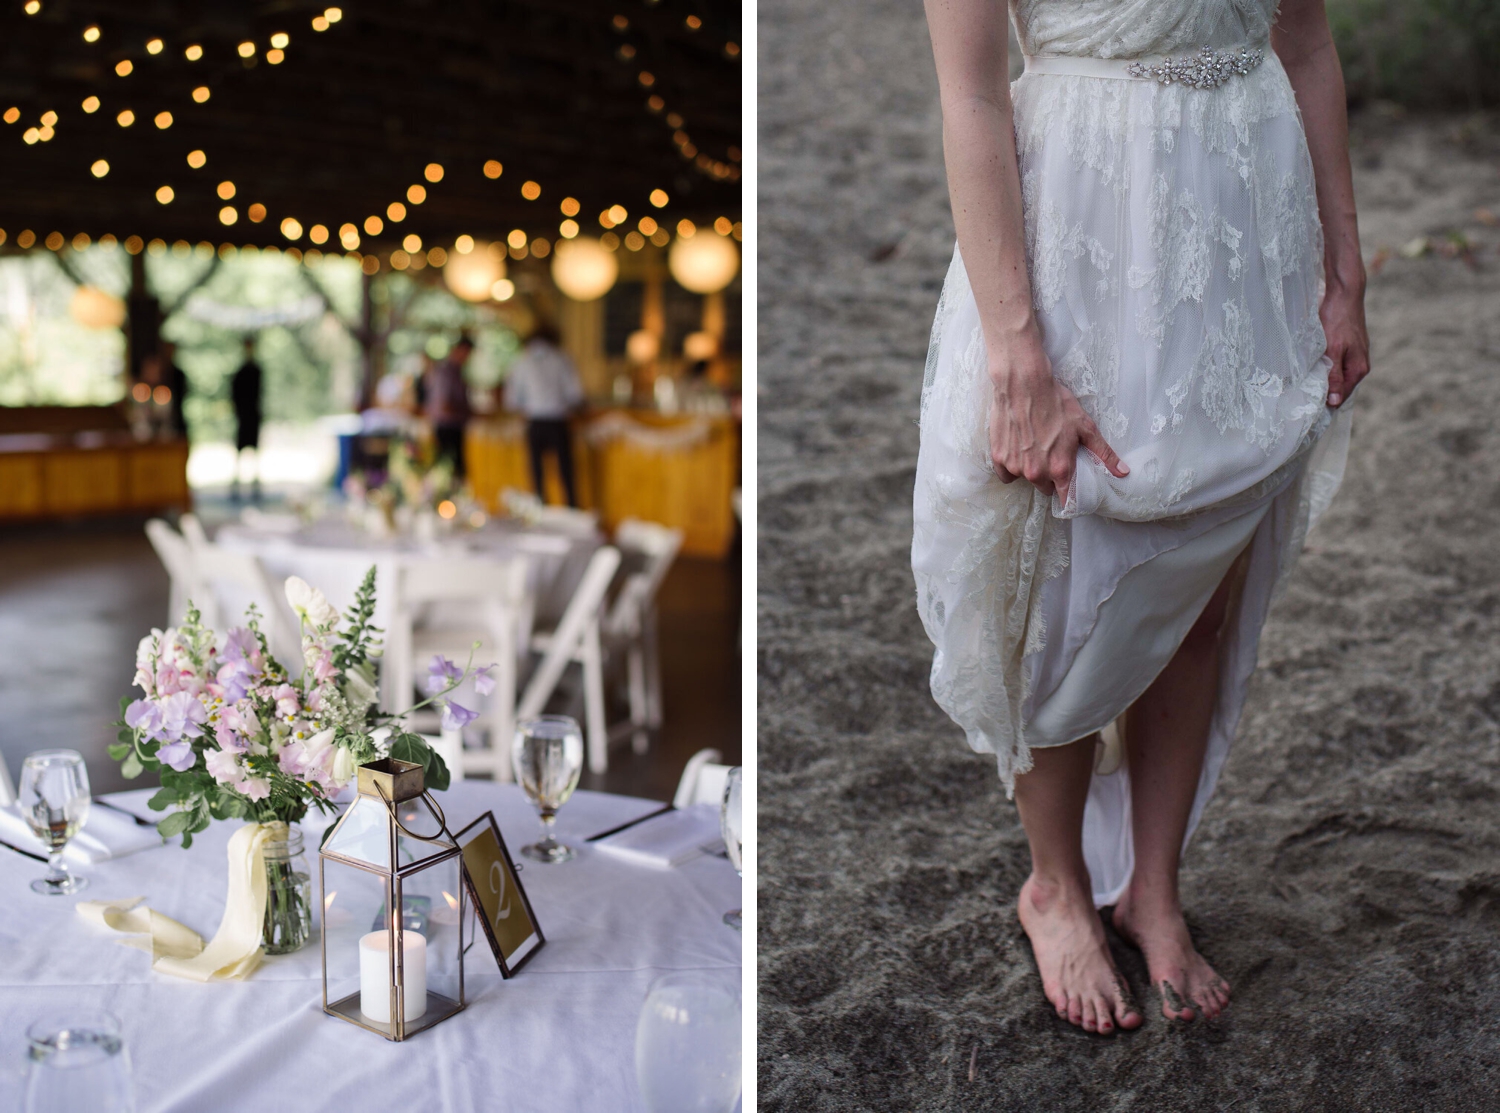 Outdoor wedding reception at Lareau Farms in Vermont